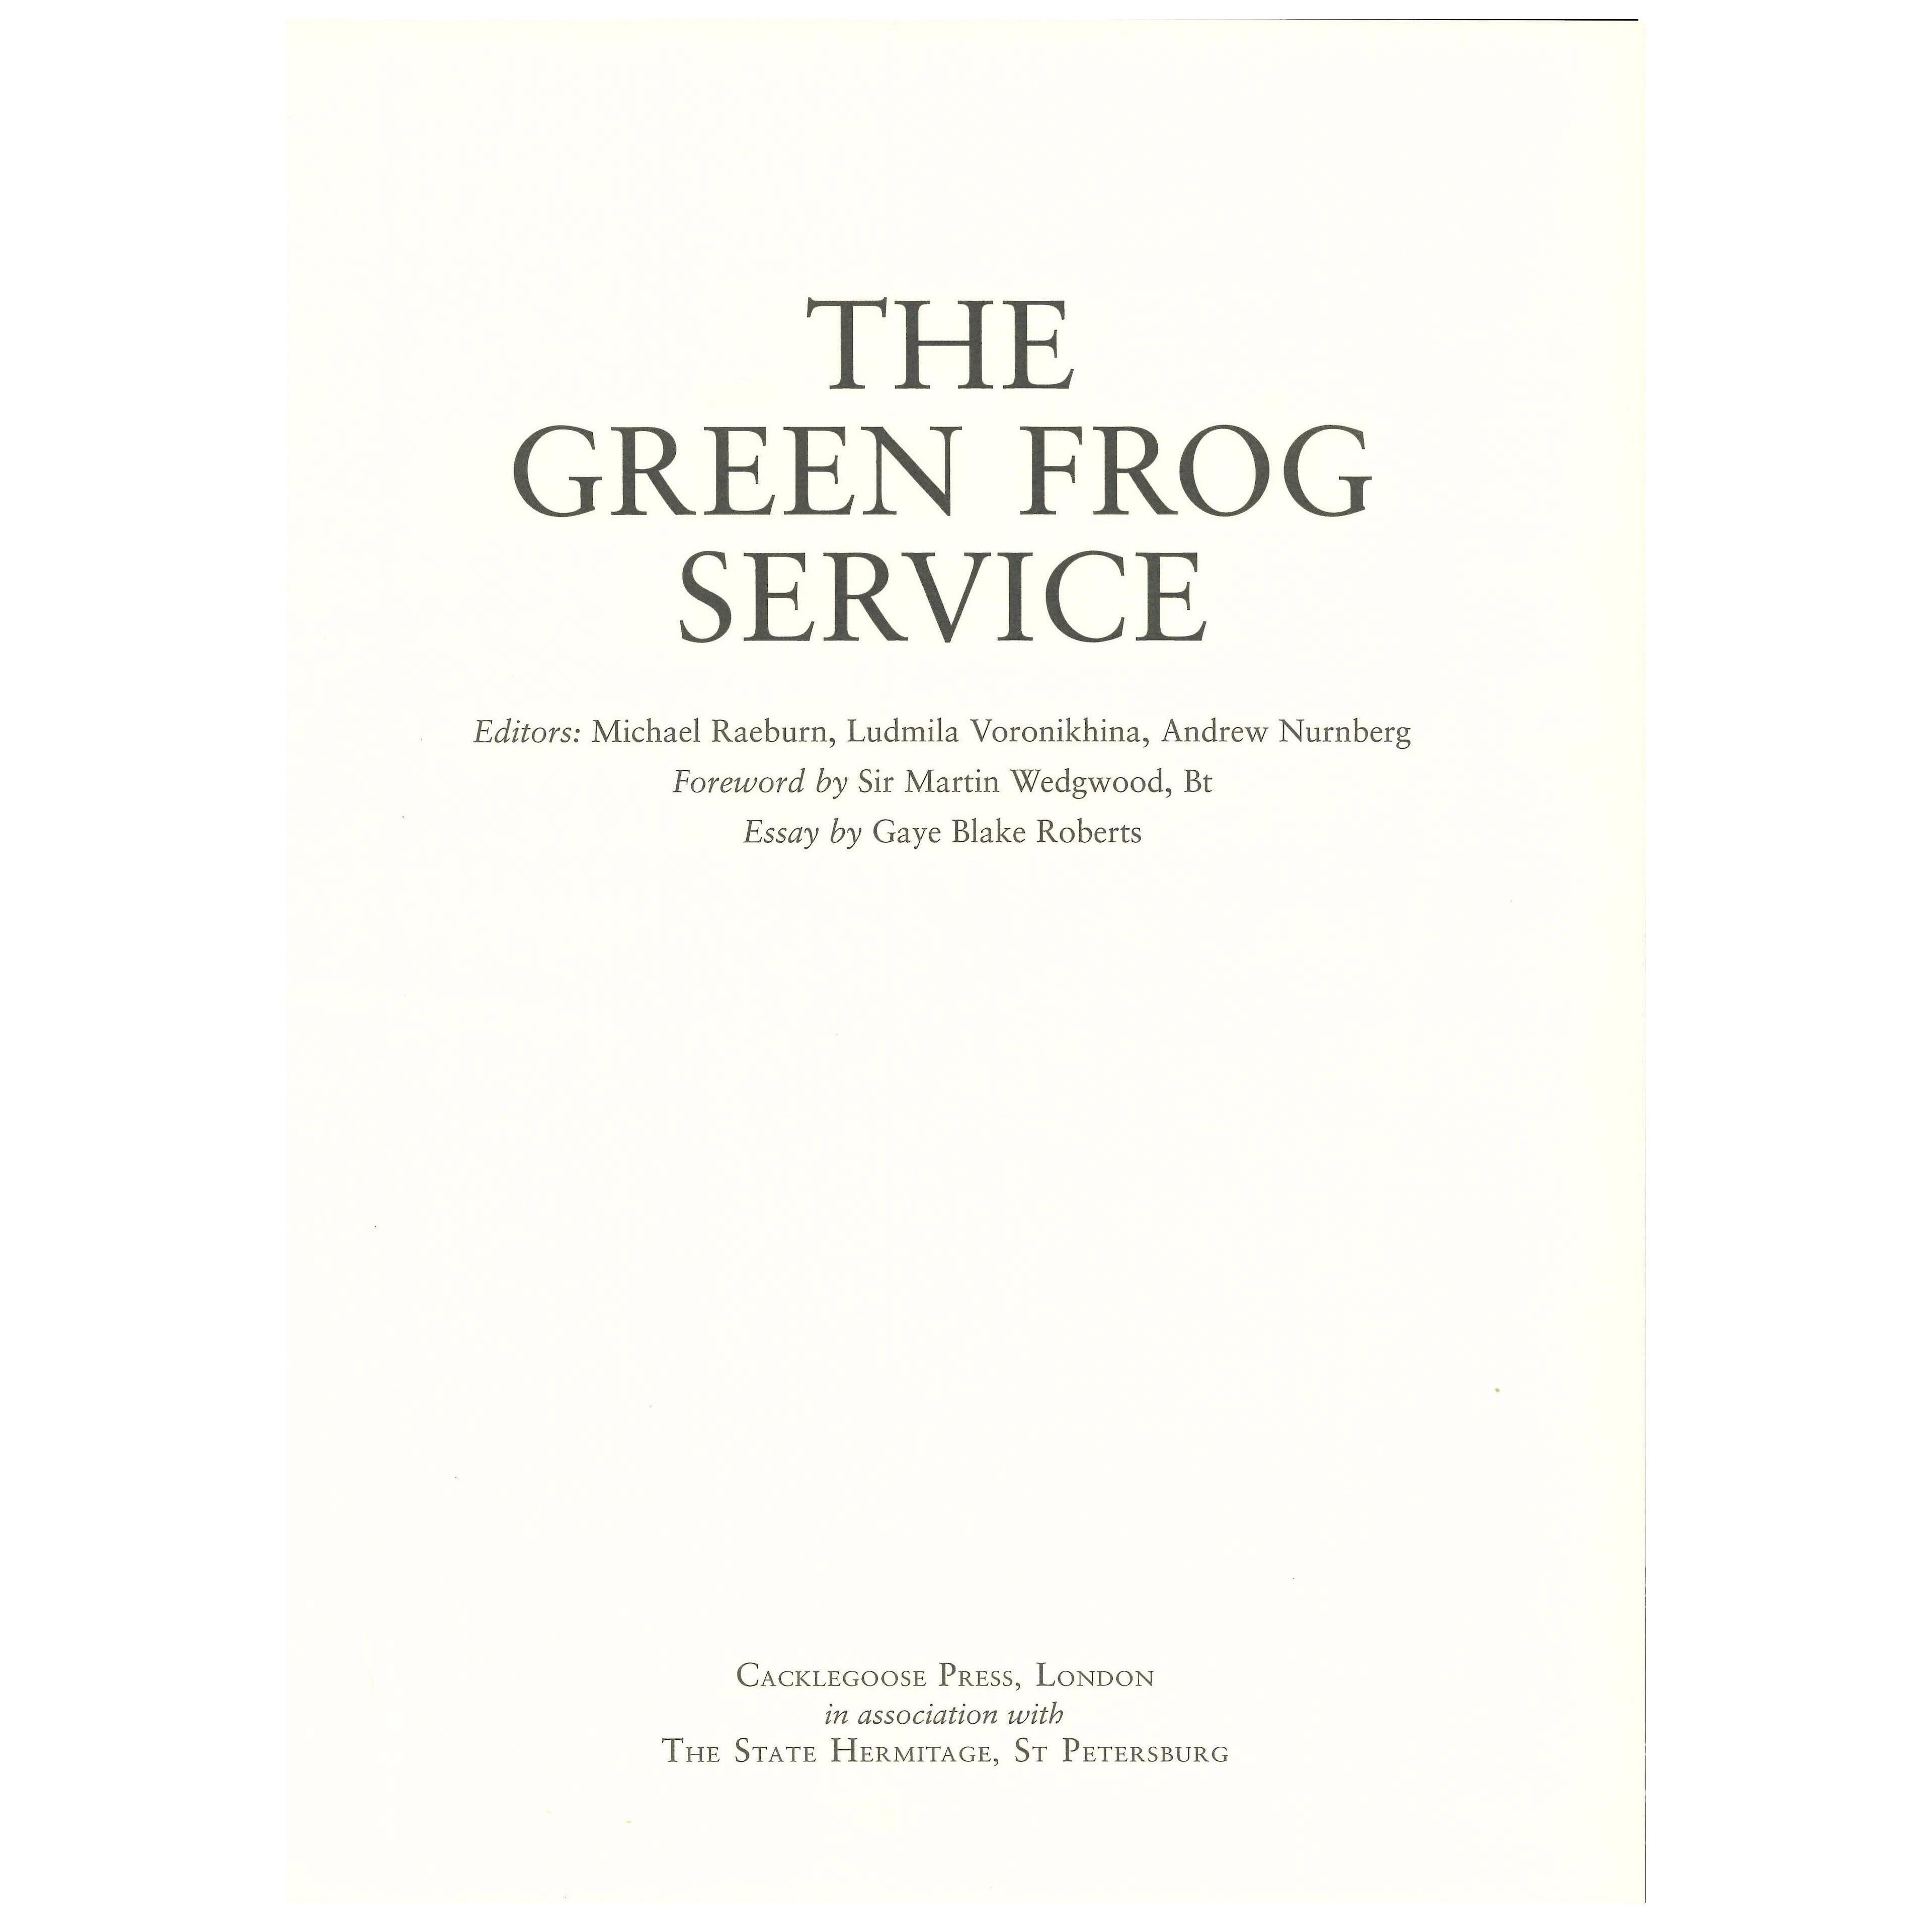 THE GREEN FROG SERVICE - Imperial Russian Dinner Service by Wedgwood. Book